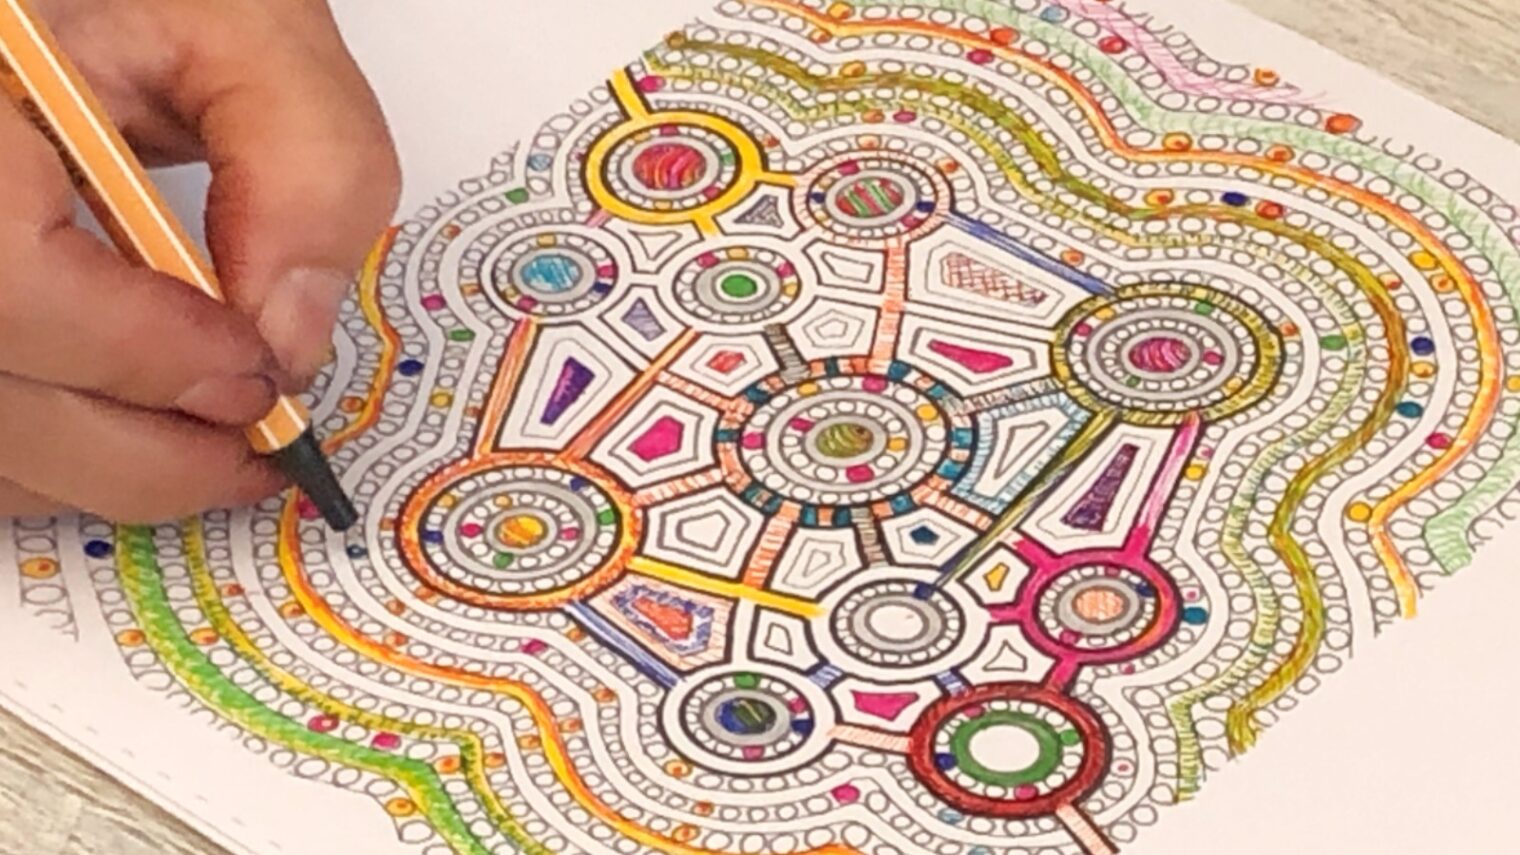 Adult Coloring Books & Anxiety: A Scientific Experiment